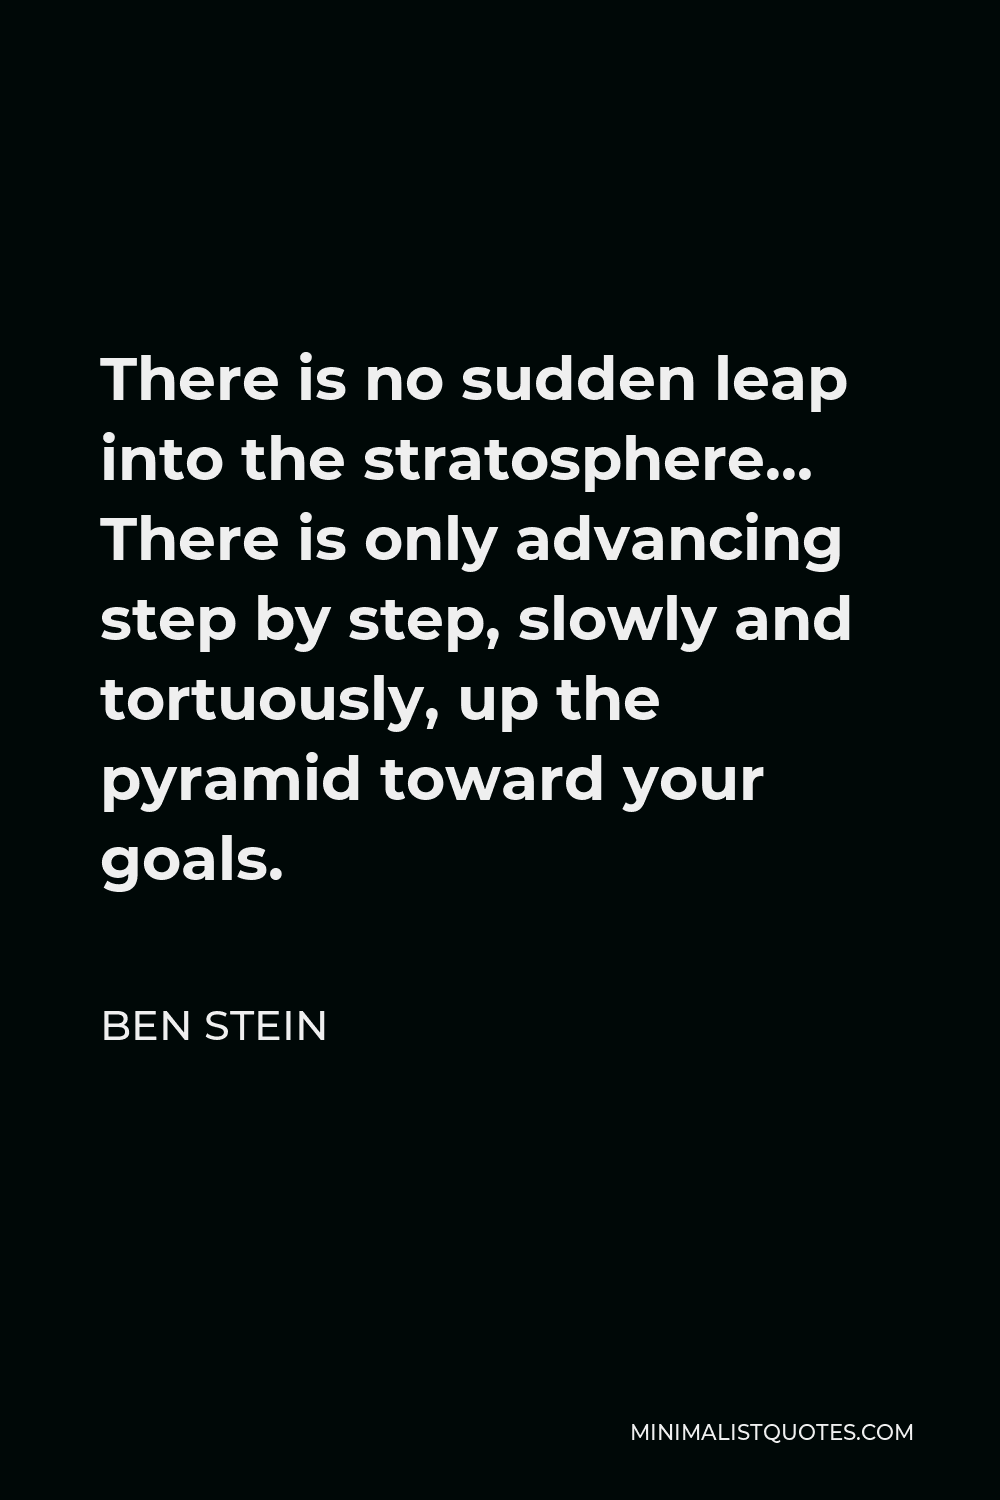 Ben Stein Quote - There is no sudden leap into the stratosphere… There is only advancing step by step, slowly and tortuously, up the pyramid toward your goals.